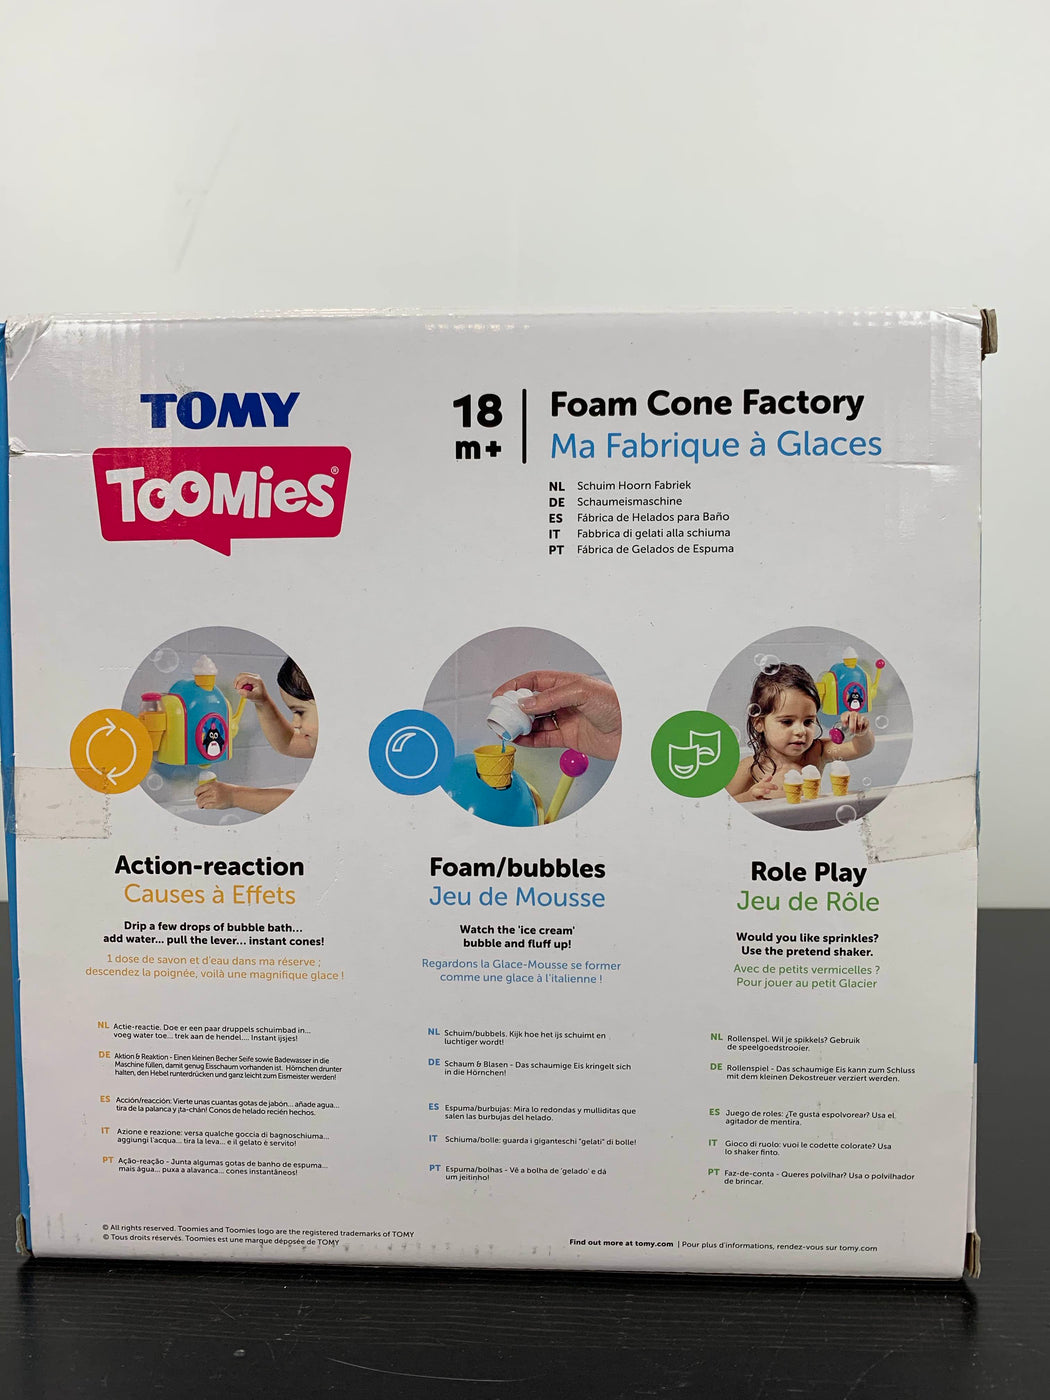 tomy cone factory